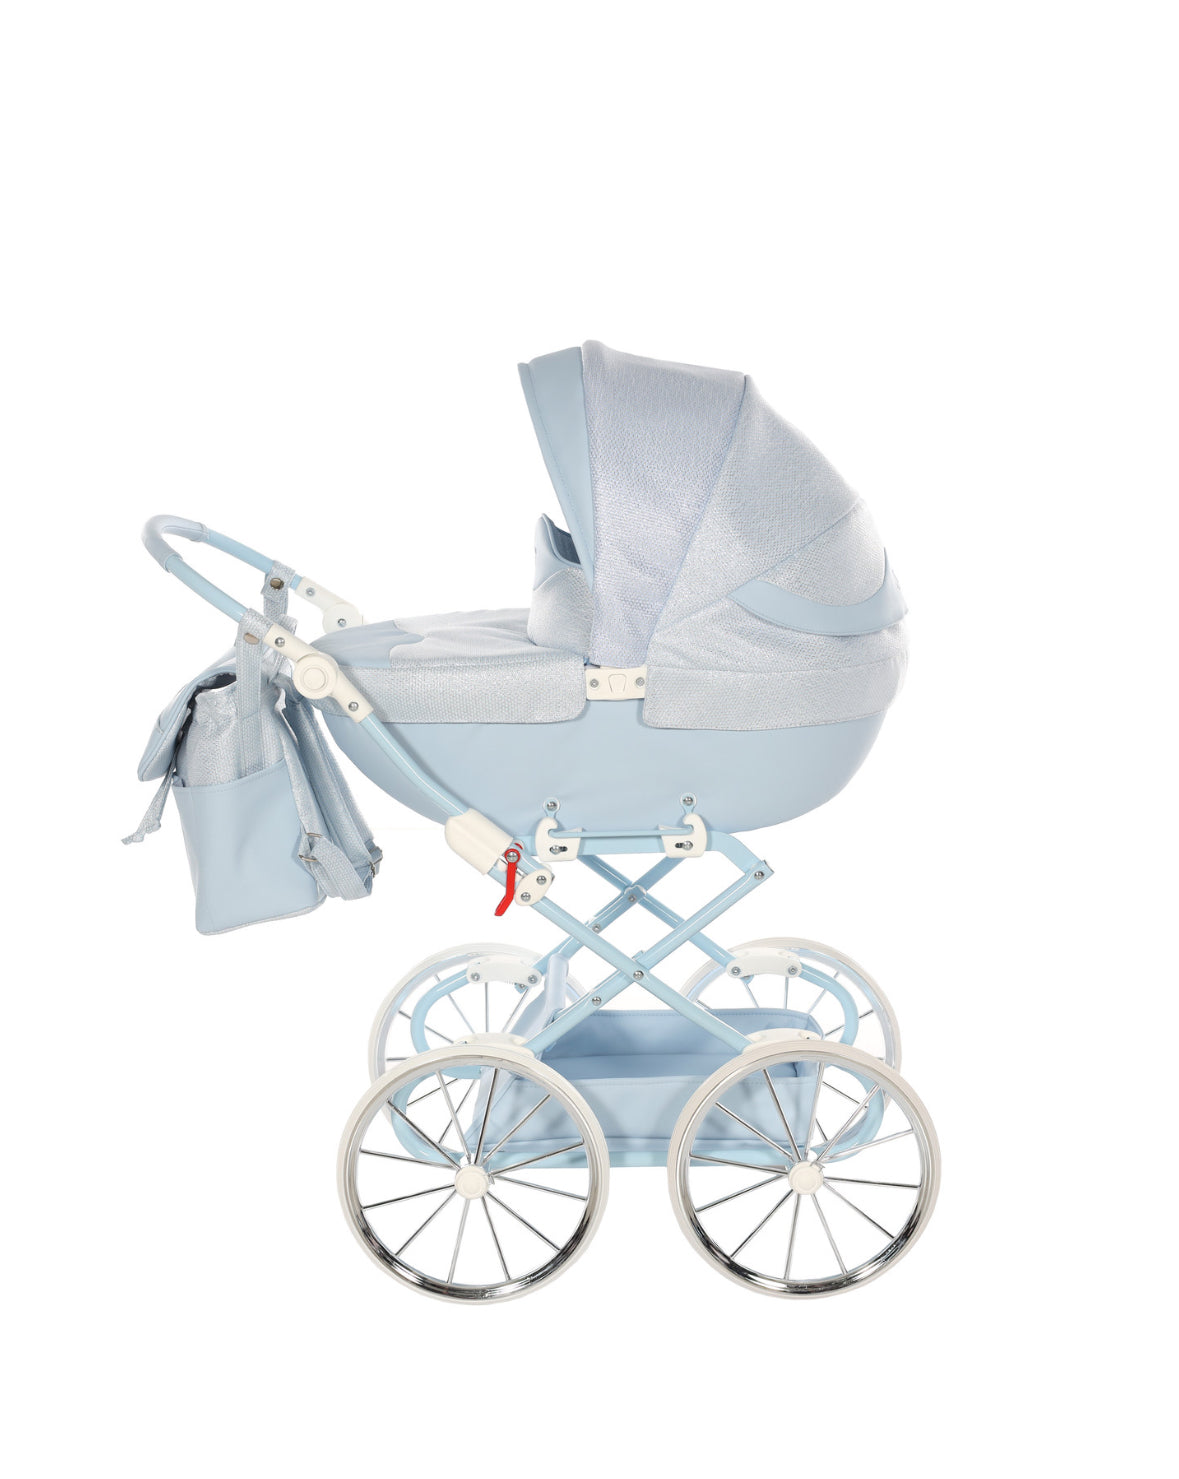 BLUE DOLCE DOLL'S PRAM - Up to 21 days delivery!